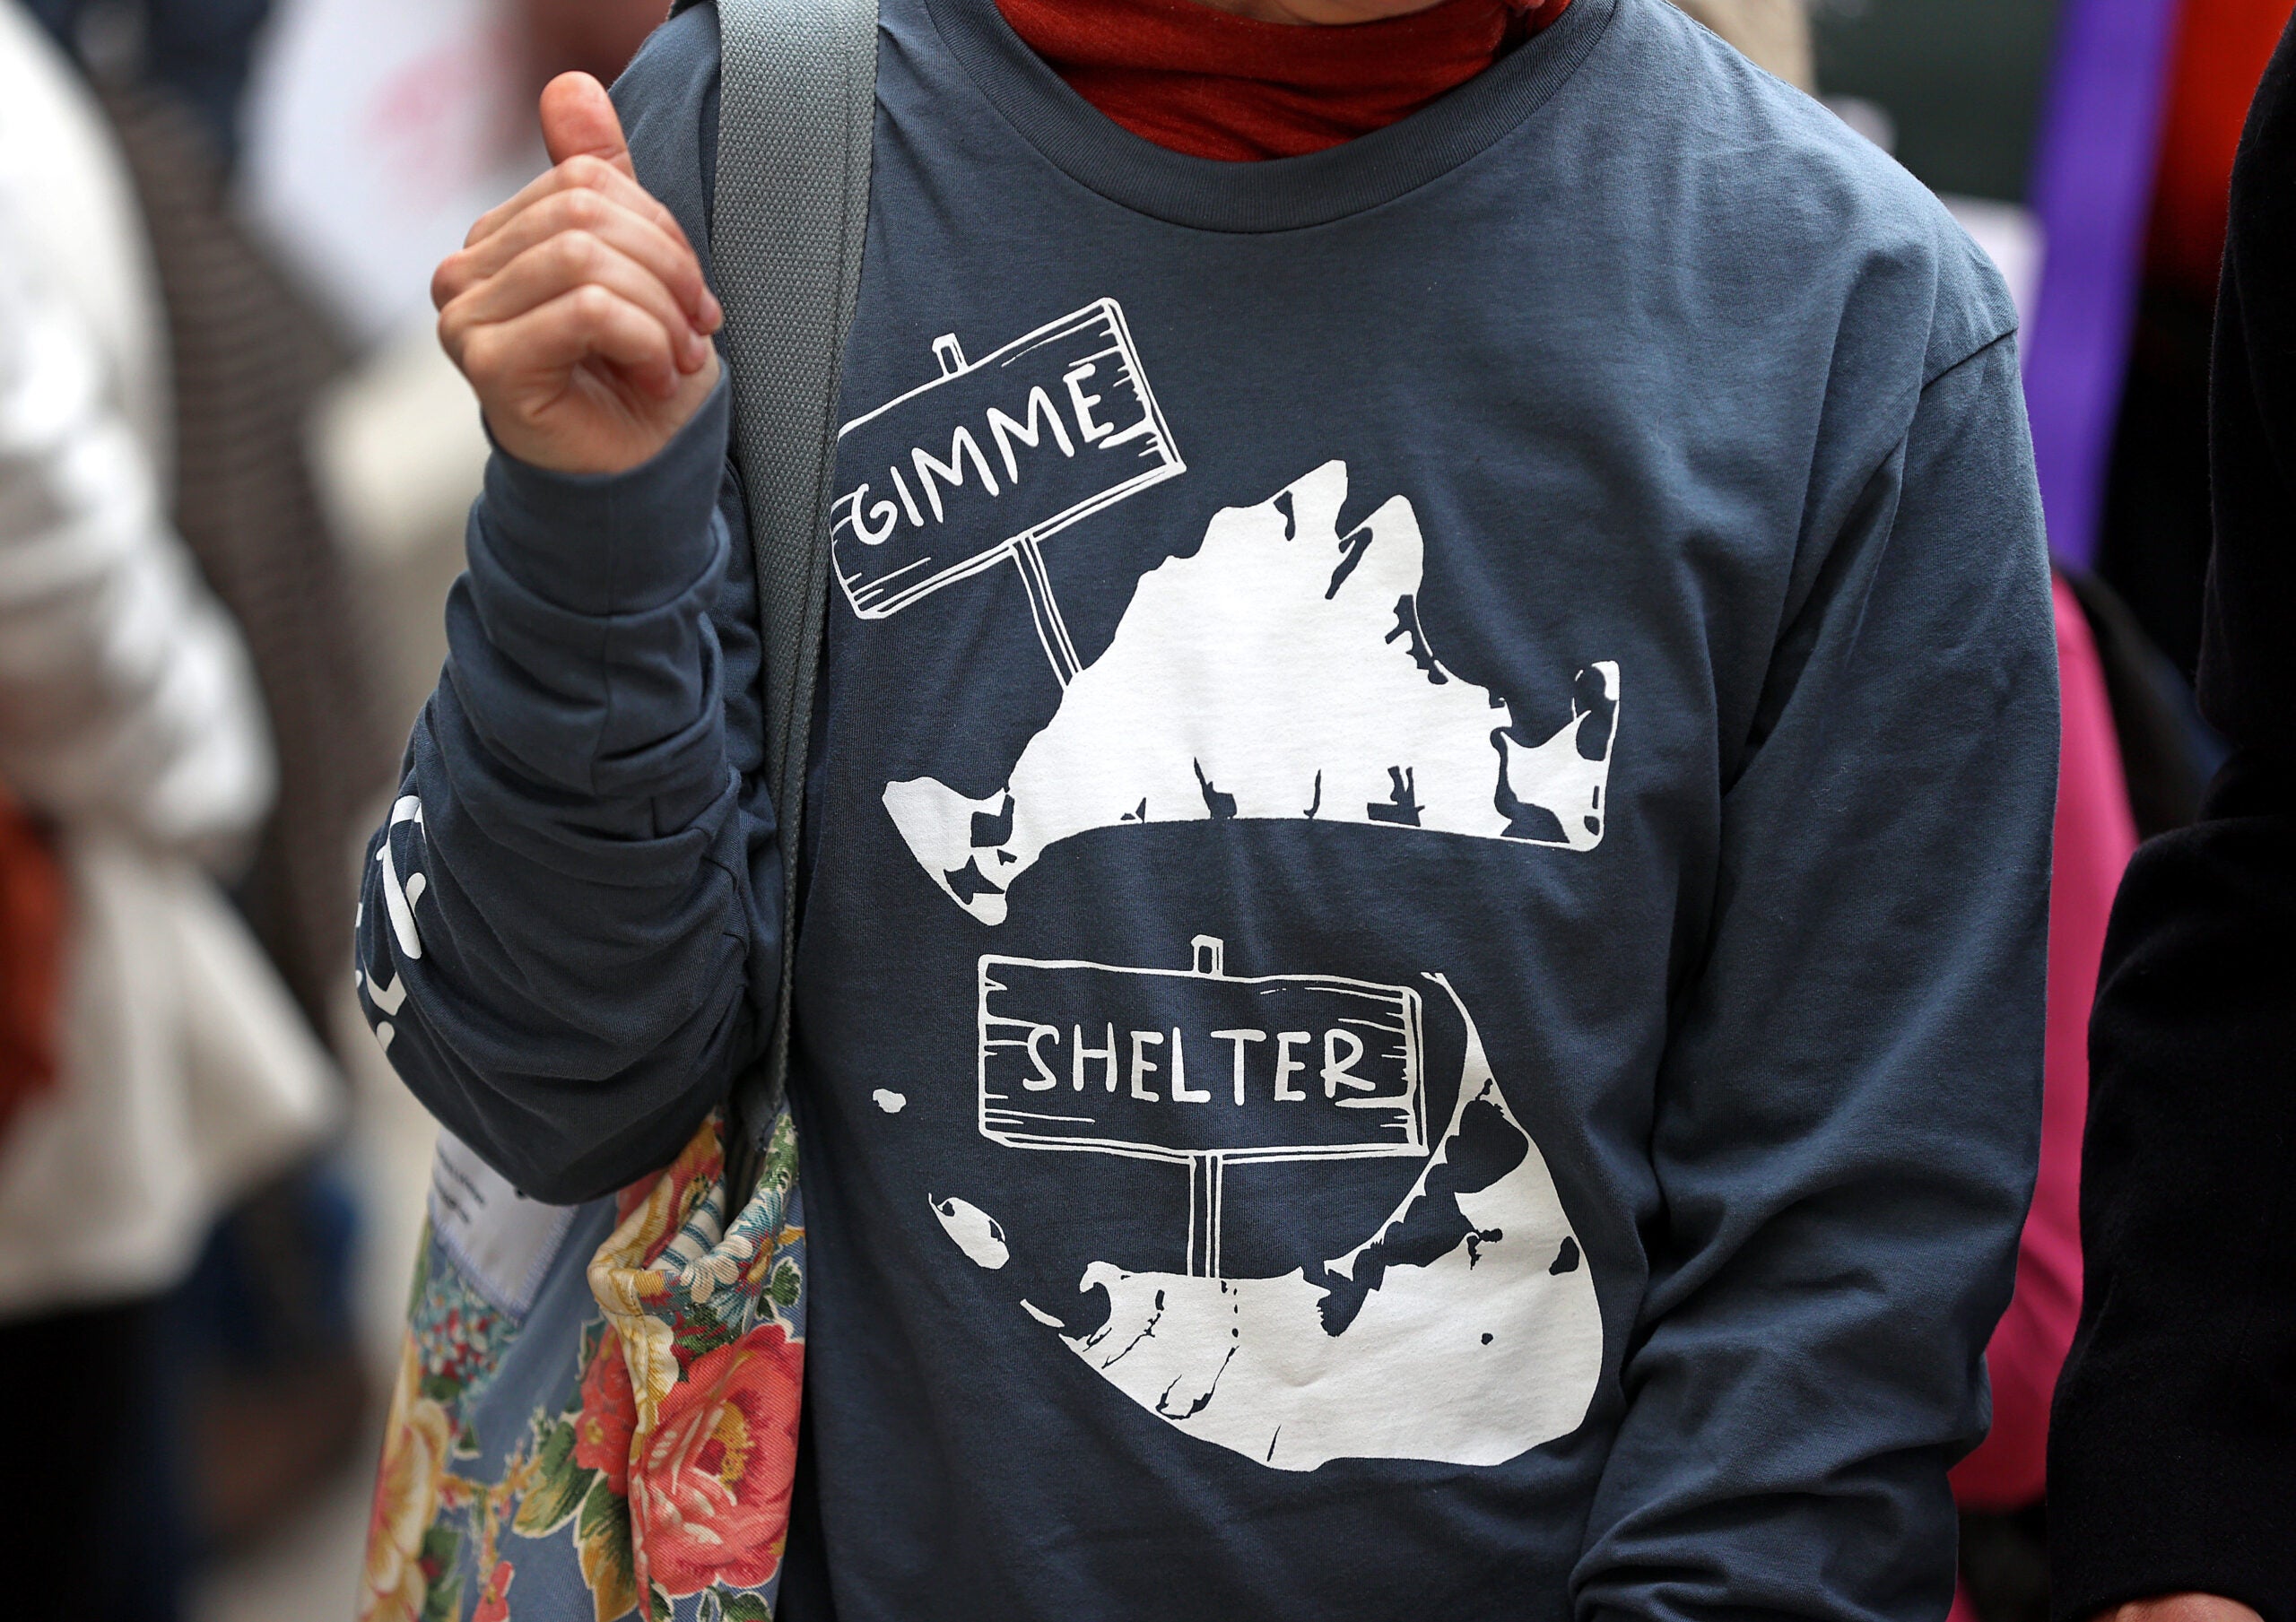 Stephanie Mashek, of Martha's Vineyard, wears a "Gimme Shelter" shirt as advocates from the island marched to the State House in March. 